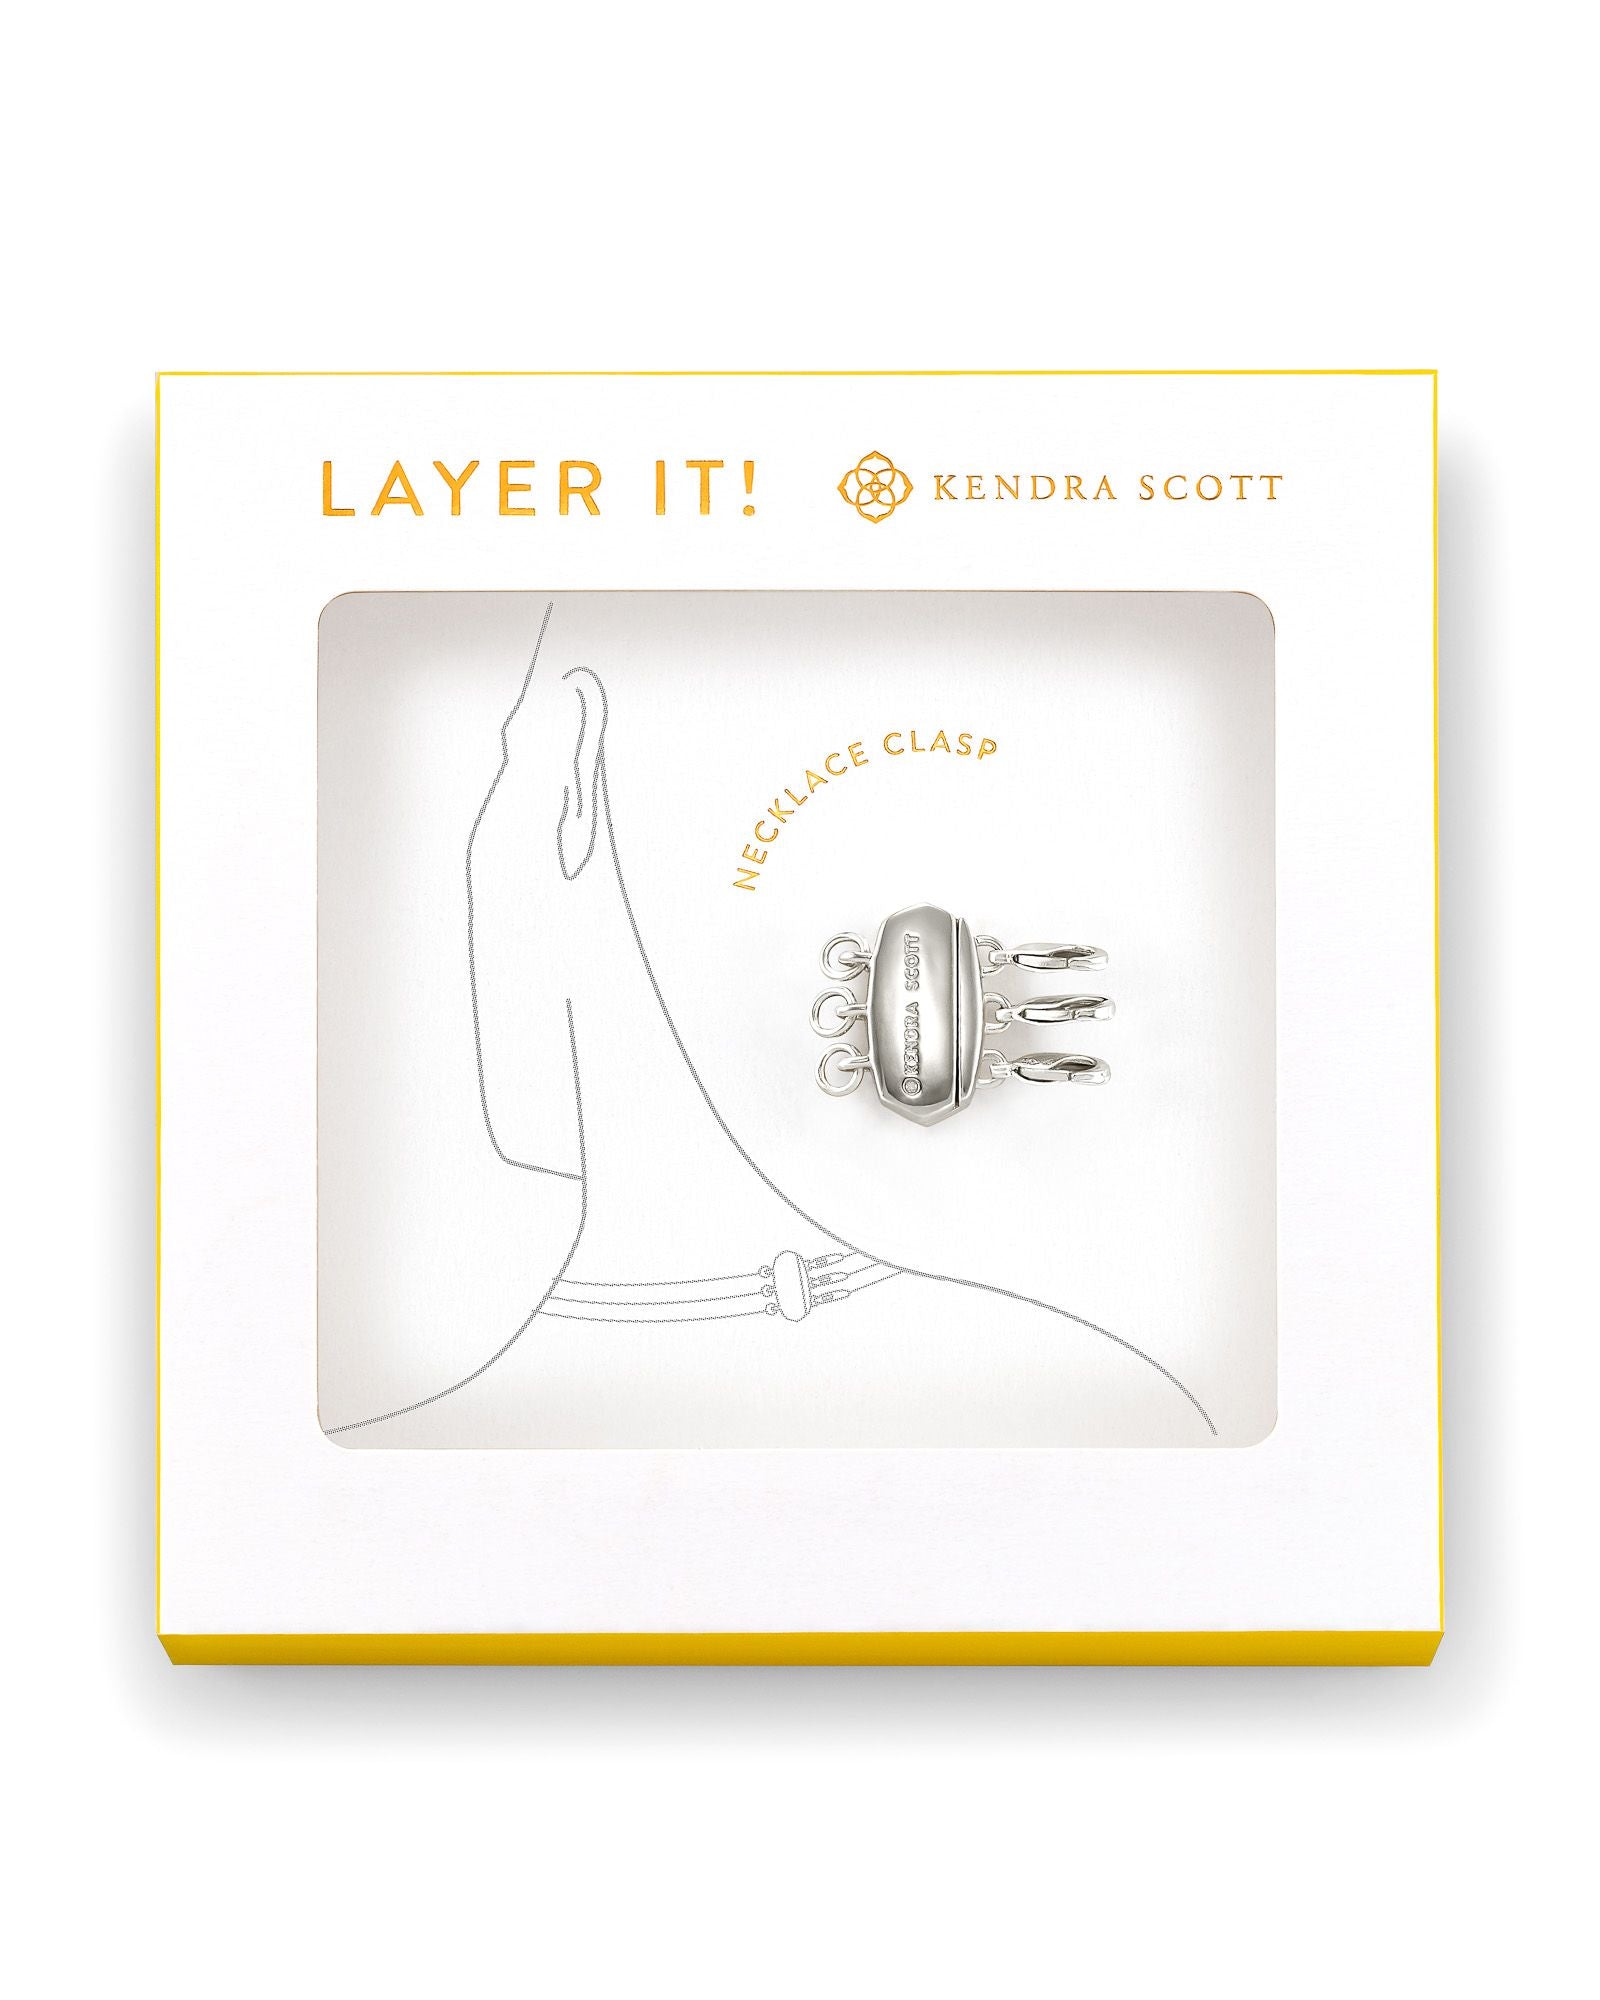 Kendra Scott Layer It Necklace Clasp in Rhodium Plated